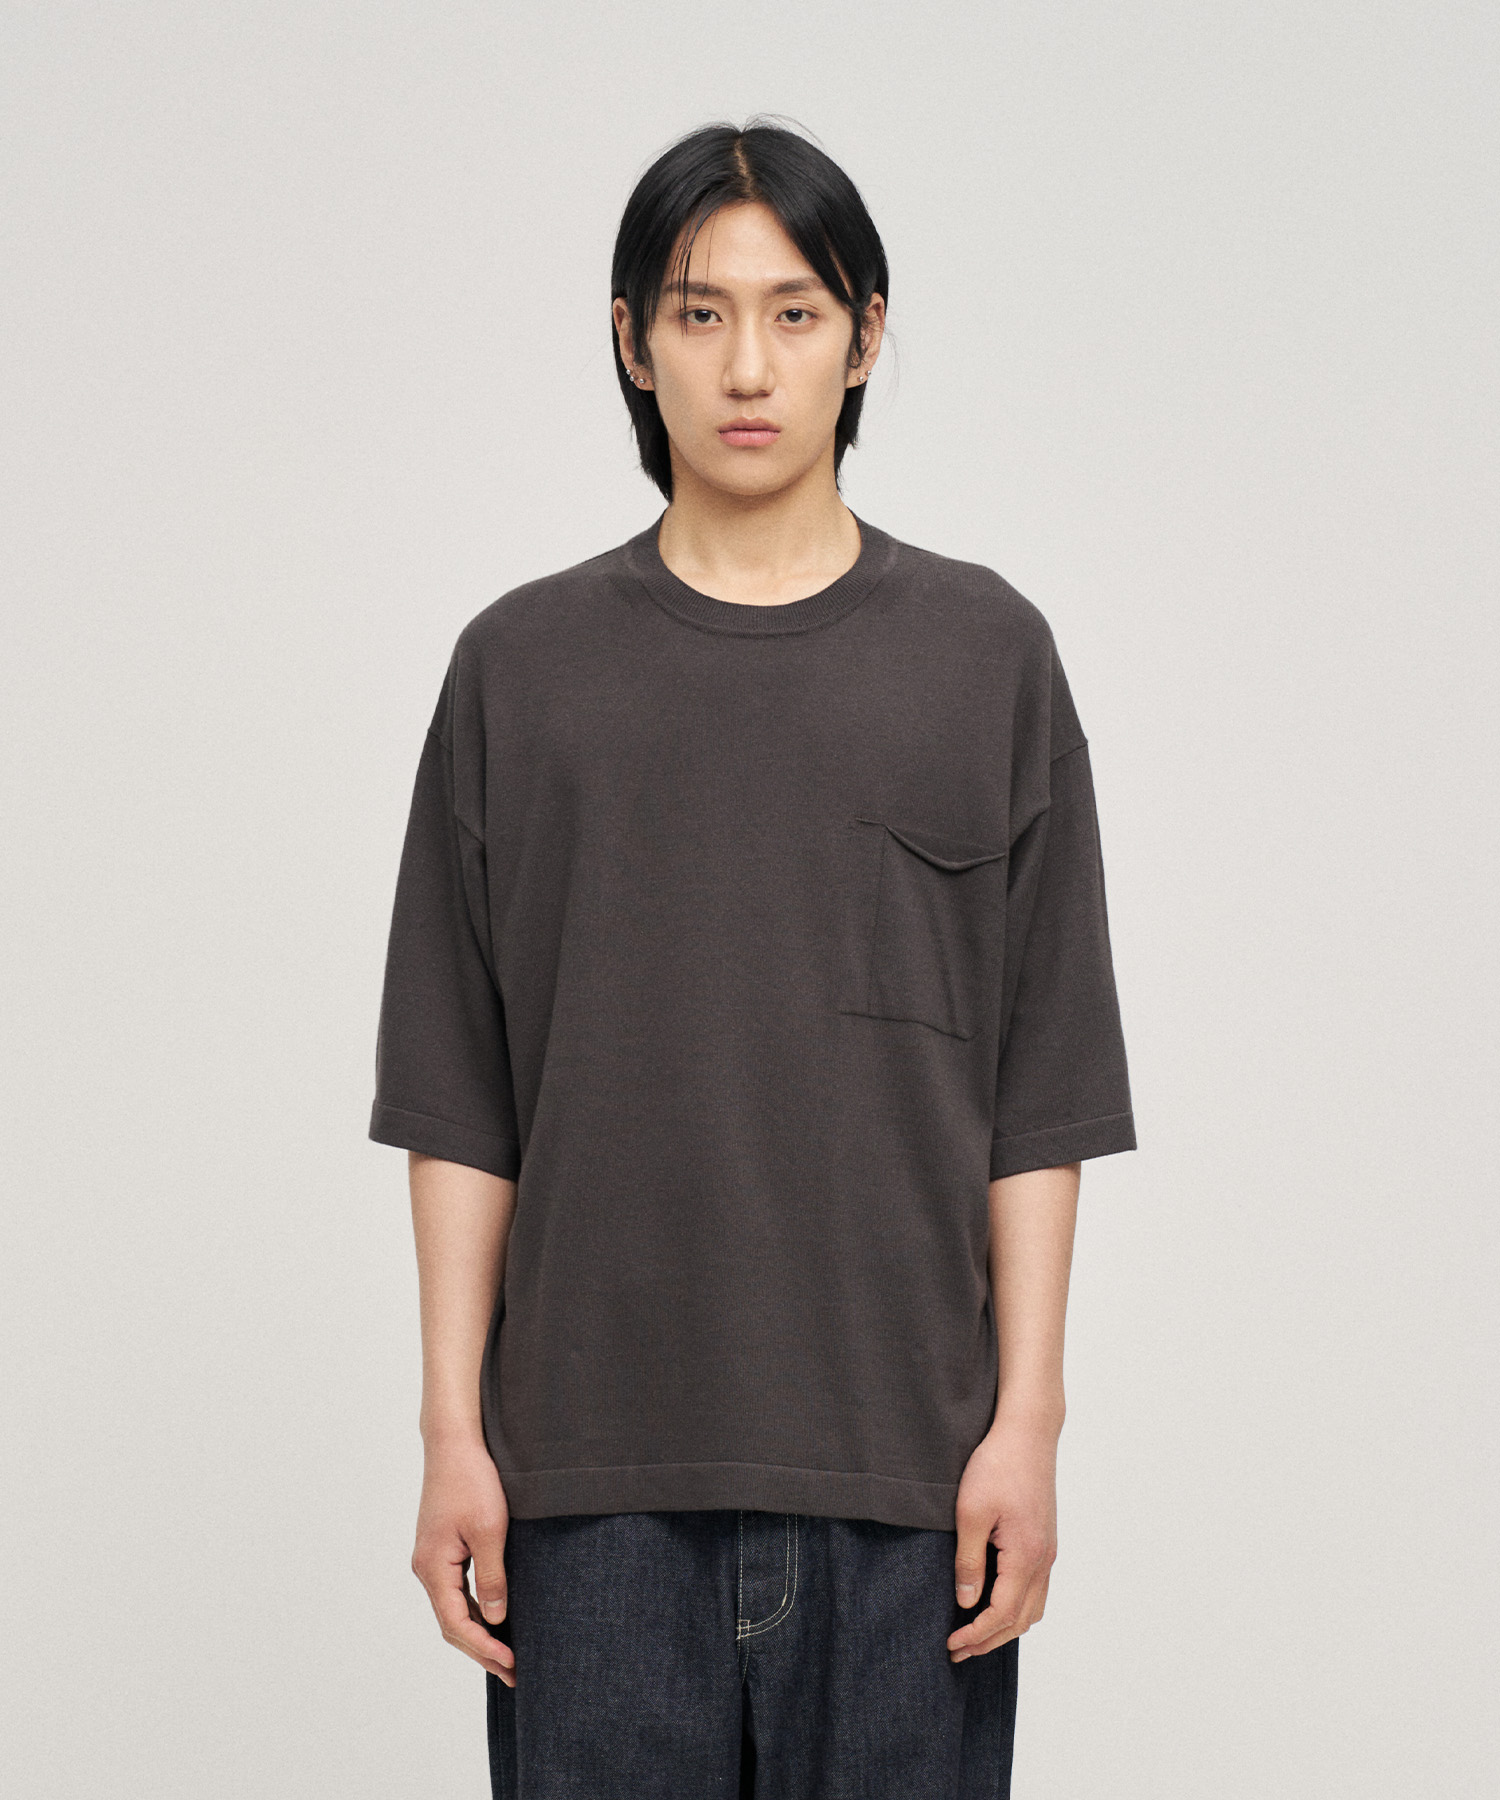 Suvin Cotton S/S (Charcoal)